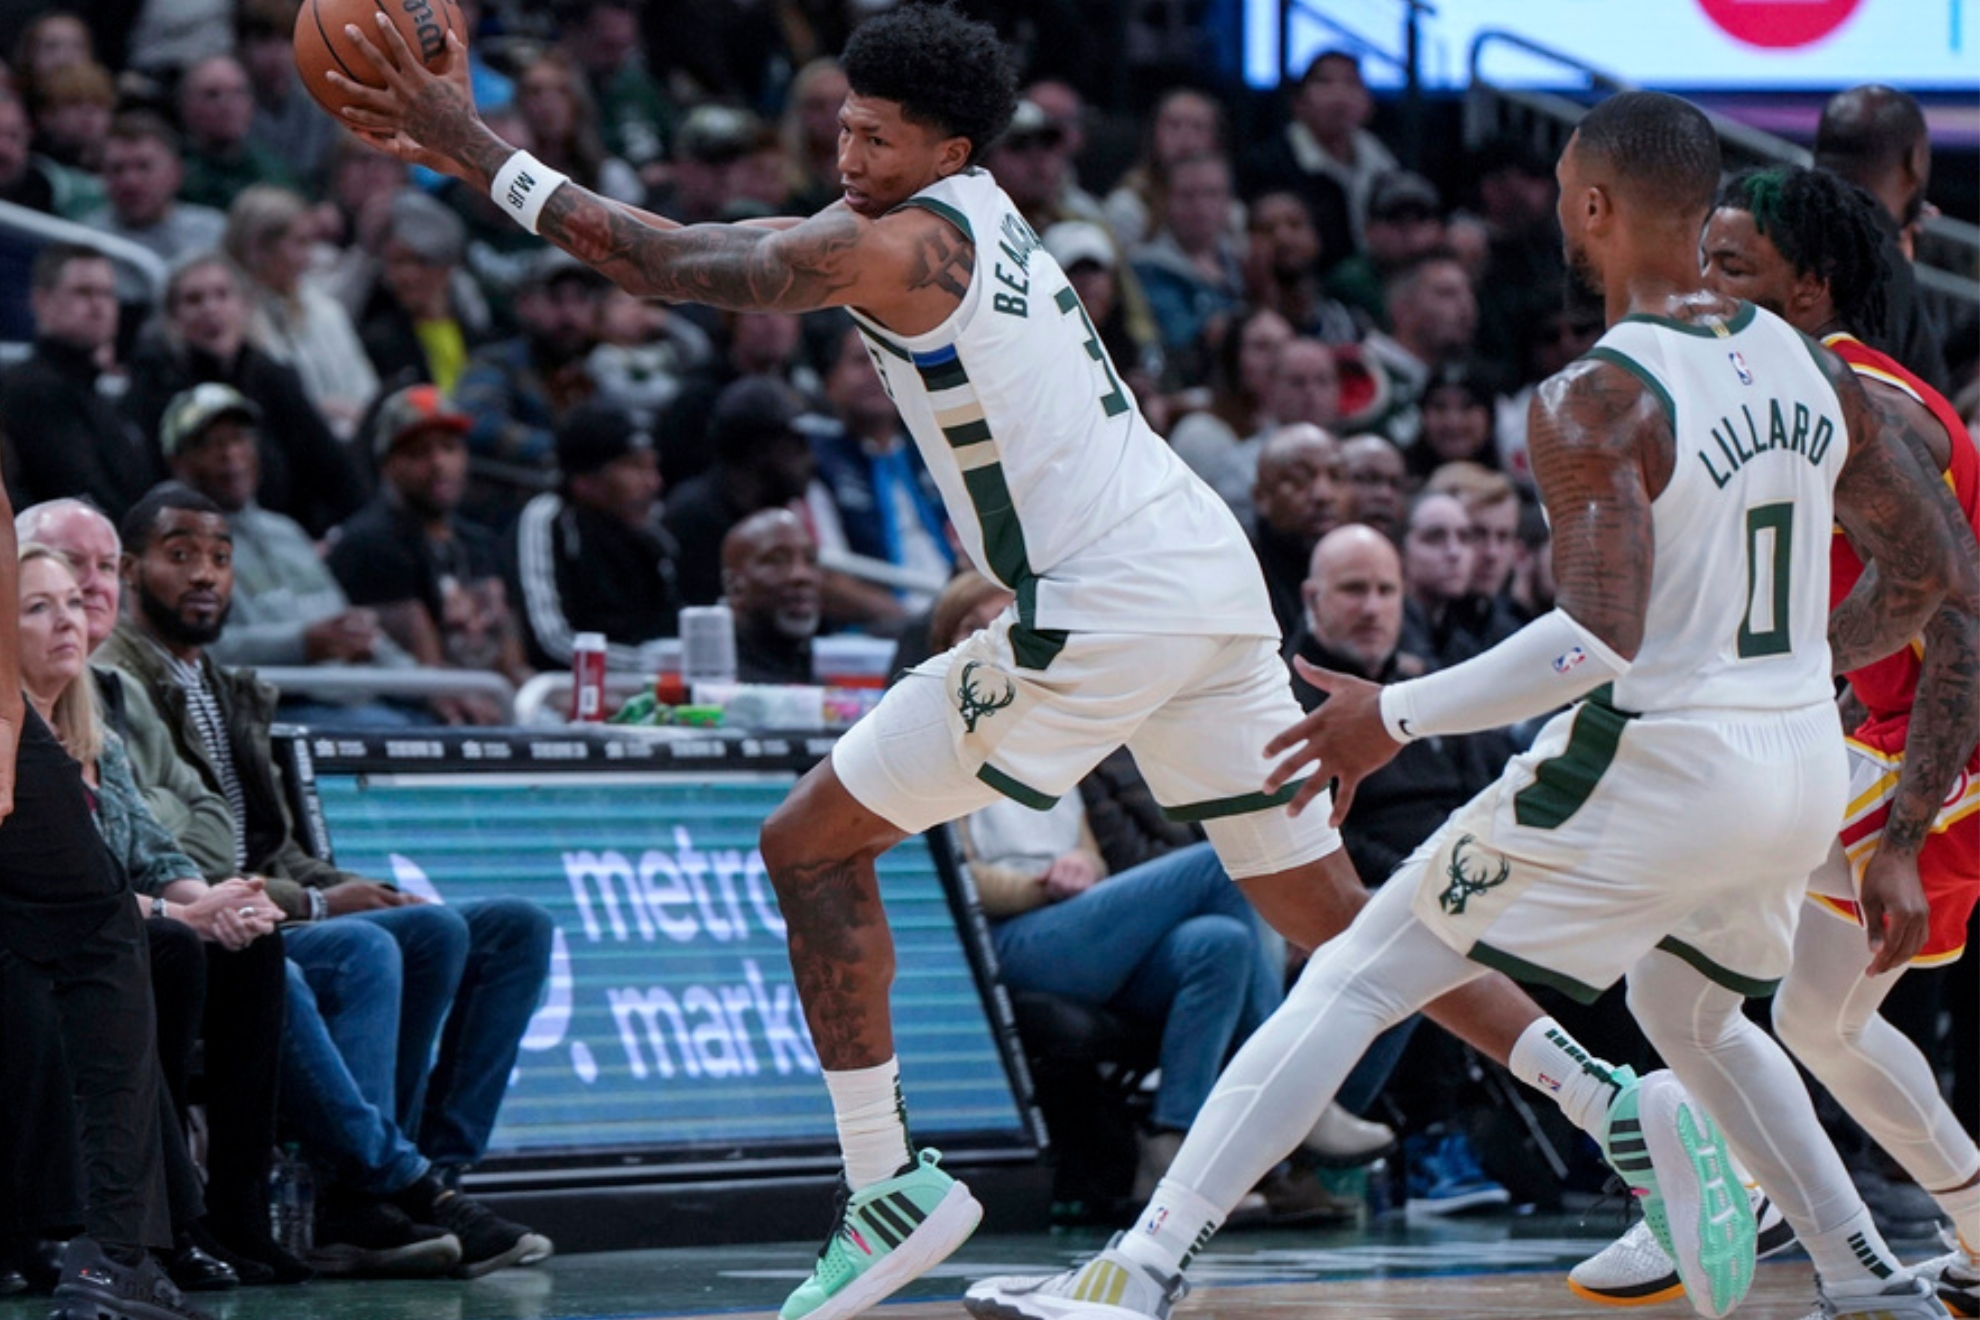 The Bucks struggled on the offensive side as they drop the game at home